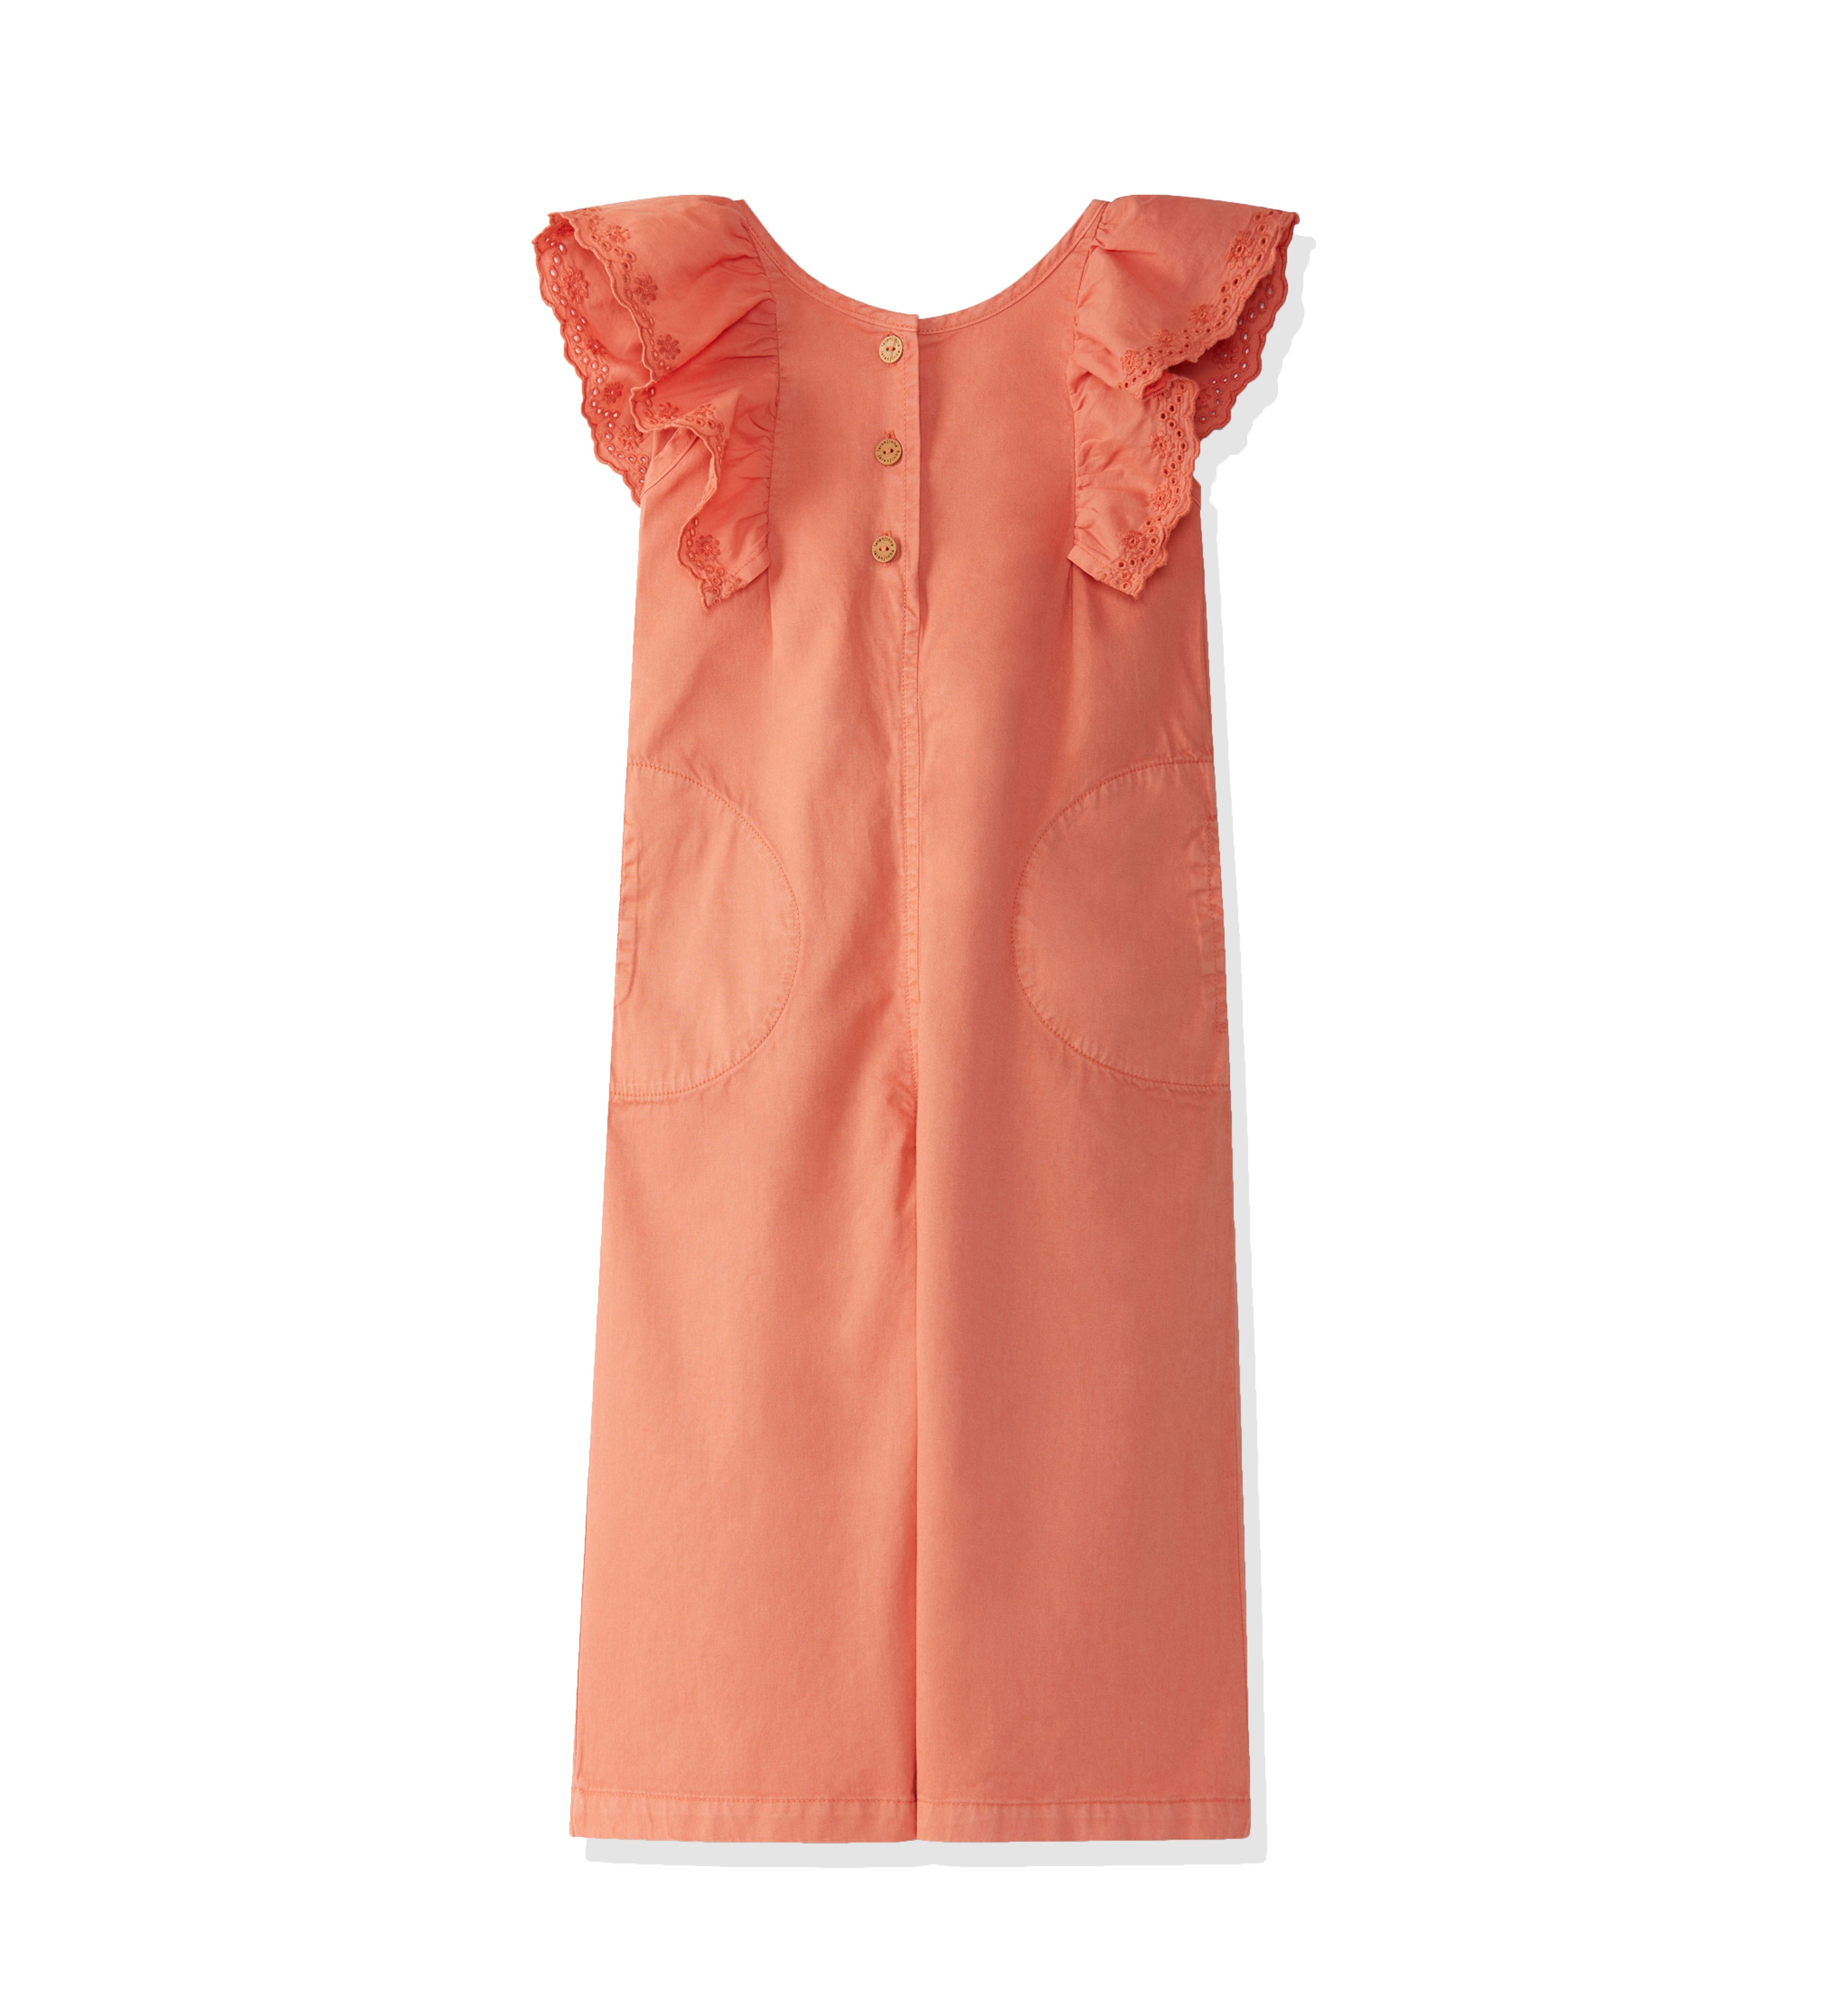 Laranjinha dungarees one piece with ribbon in coral color